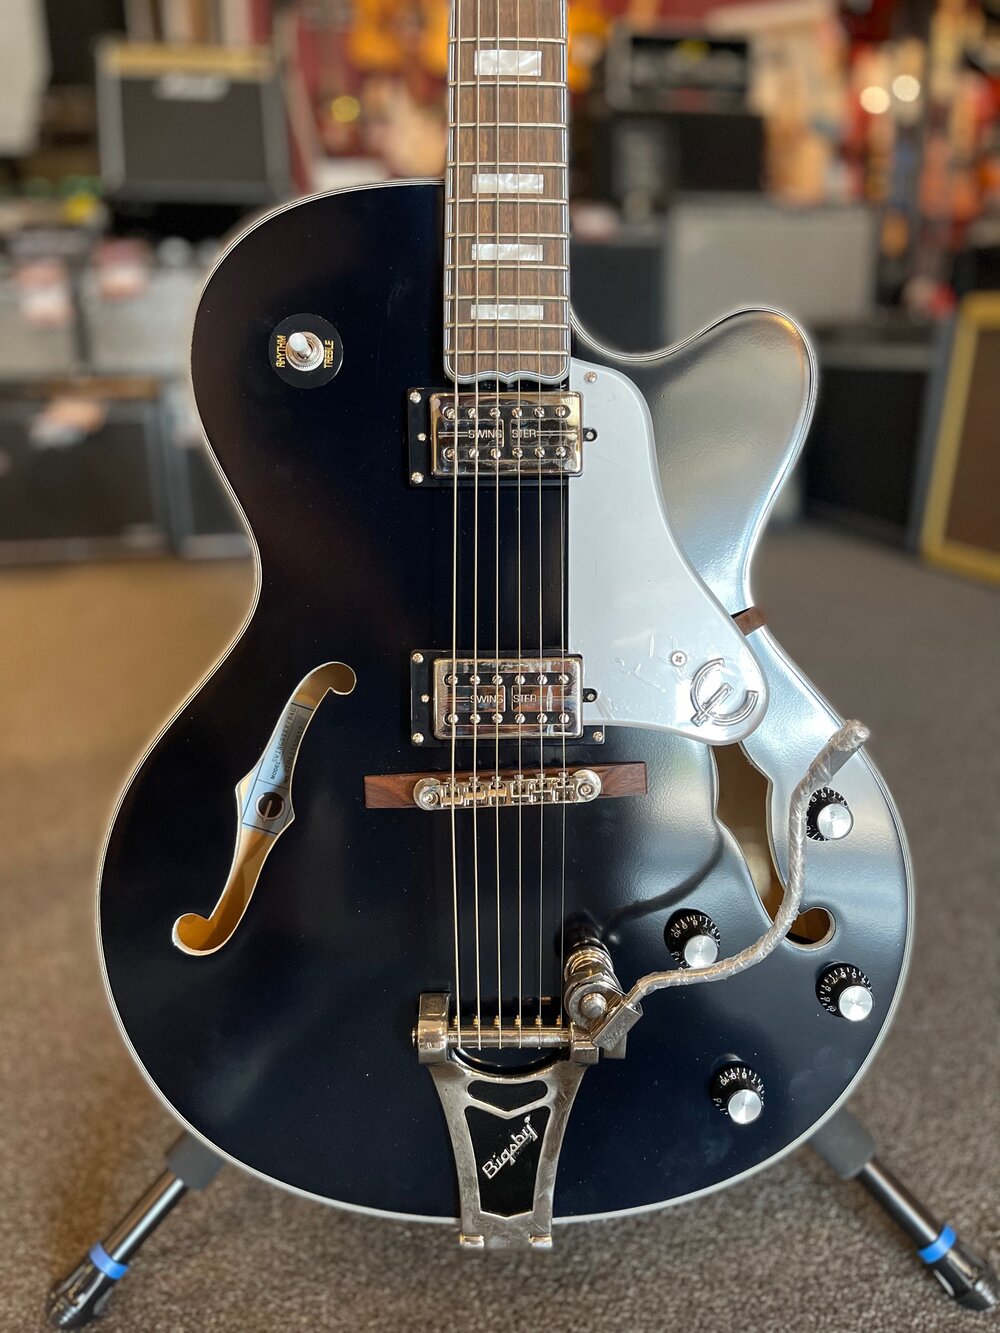 Epiphone Emperor Swingster Hollowbody - Black Aged Gloss